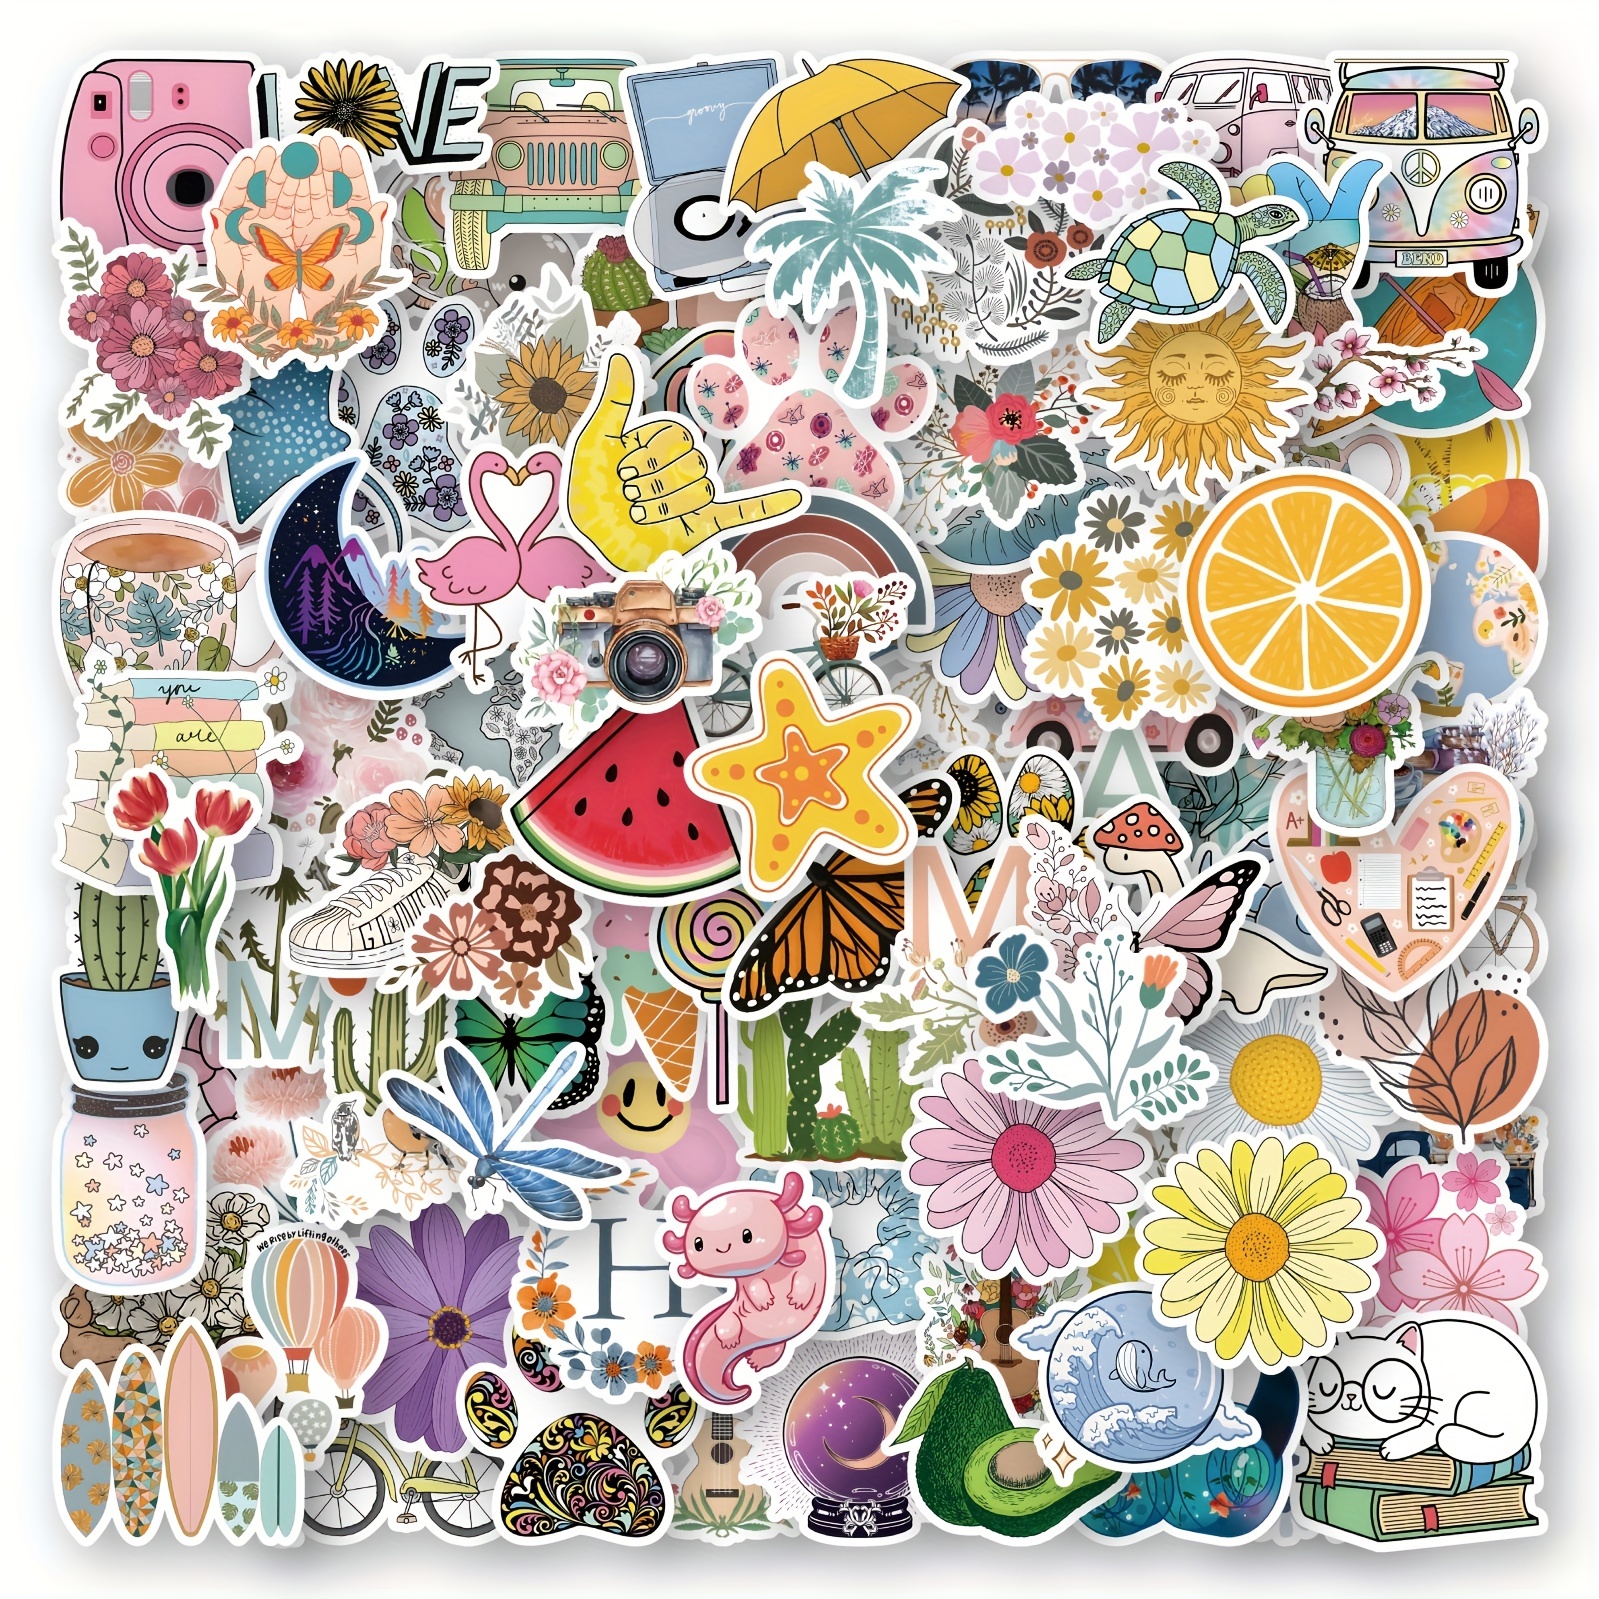 ALOHA SUN Cool Girls Travel Stickers for Scrapbook Planners Journal  Notebooks Waterproof Decals for Water Bottles Laptop Luggage Phone Case  Aesthetic